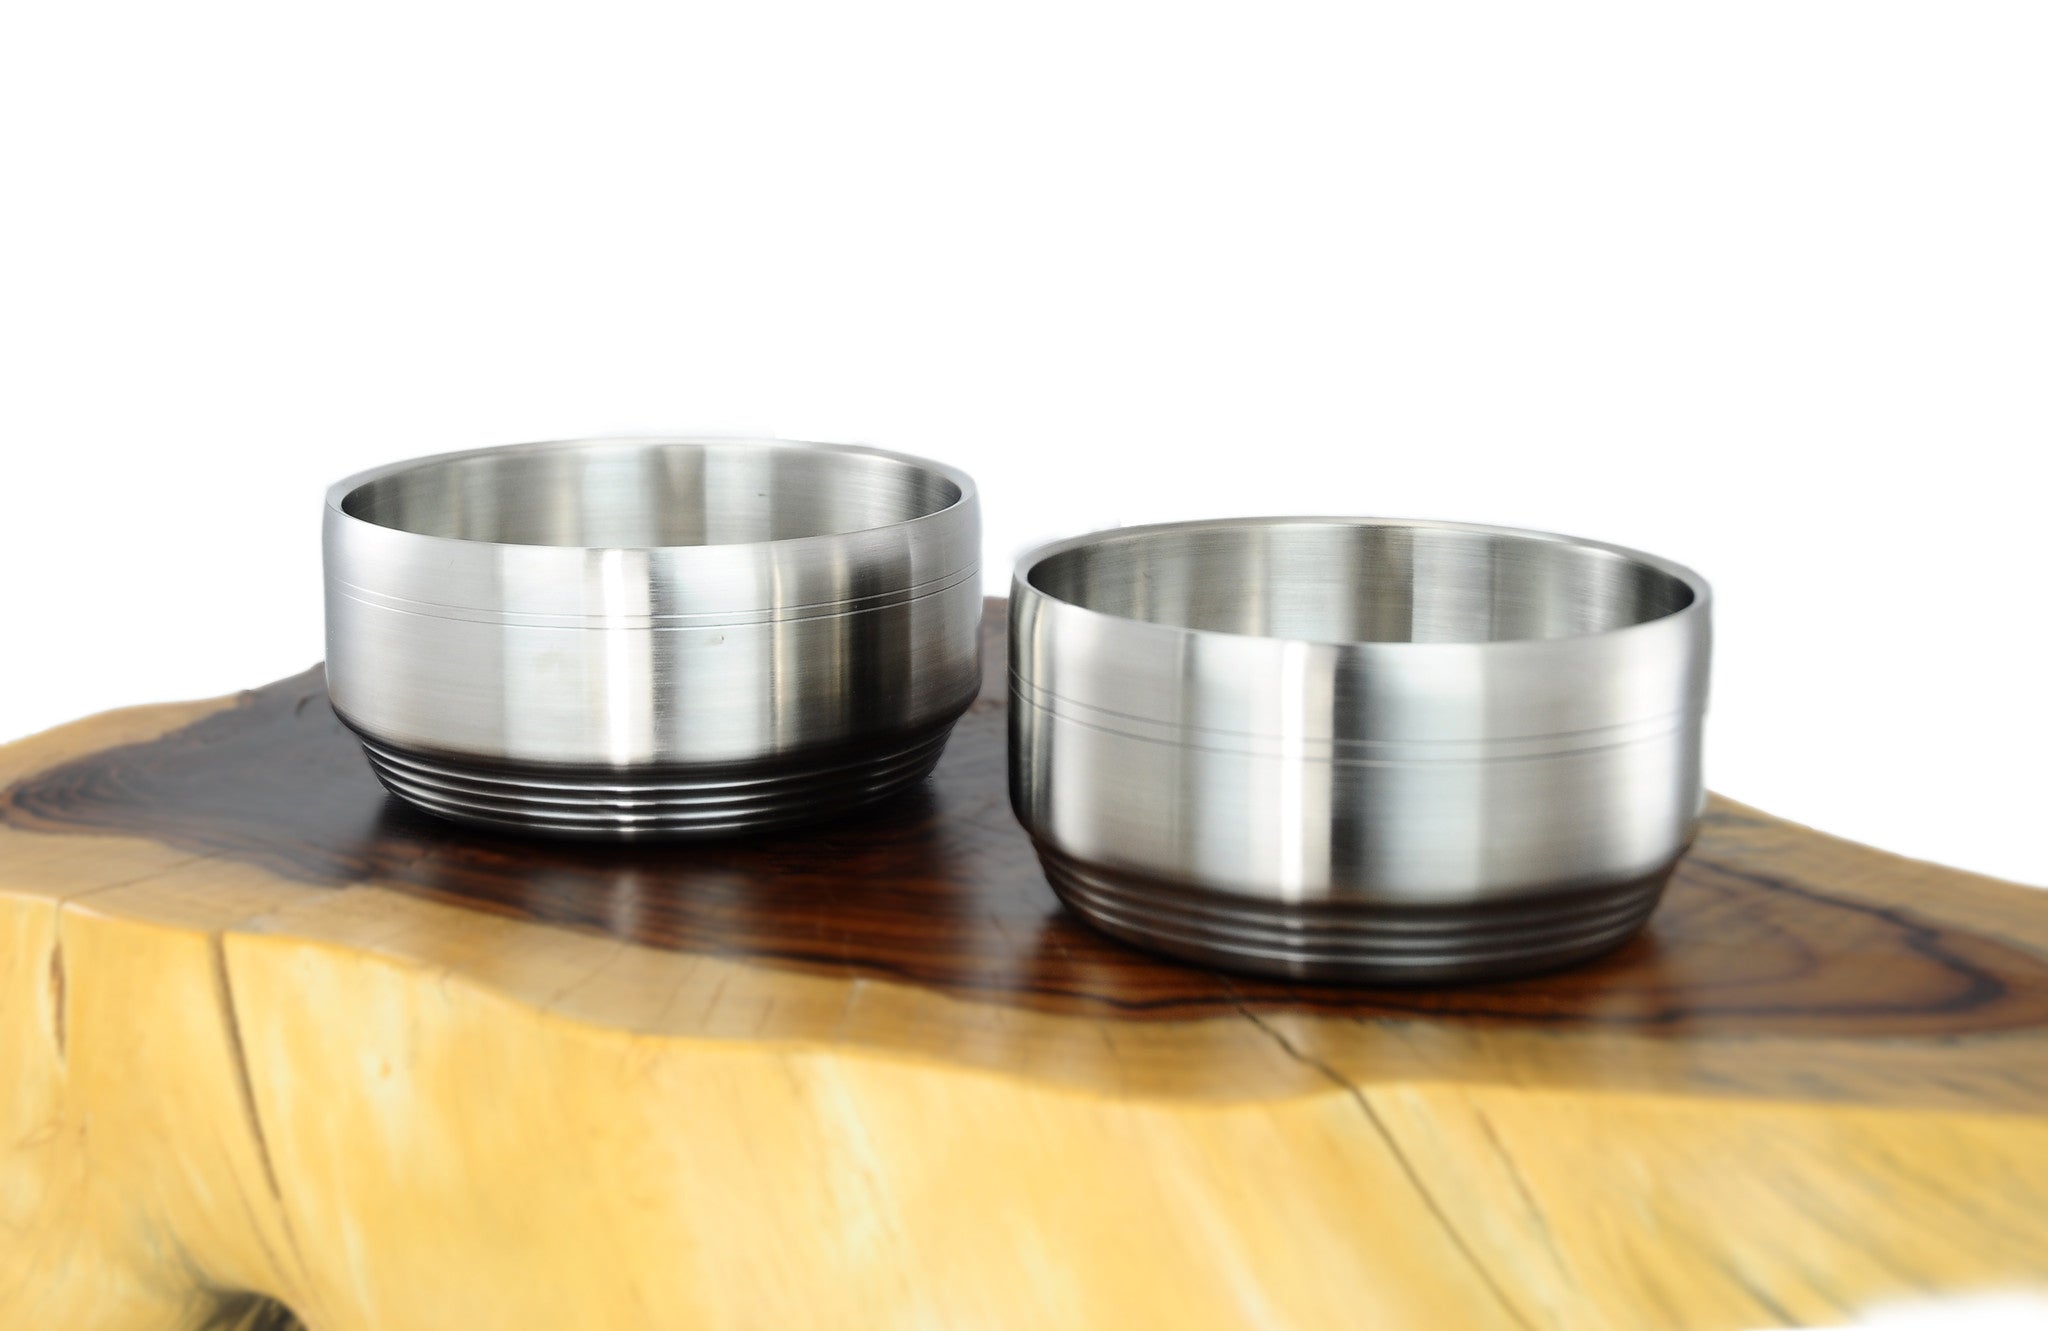 Double Wall Satin Stainless Steel Bowls & Dishes 이중 샤틴 스텐레스 그릇, Stainless Steel - eKitchenary